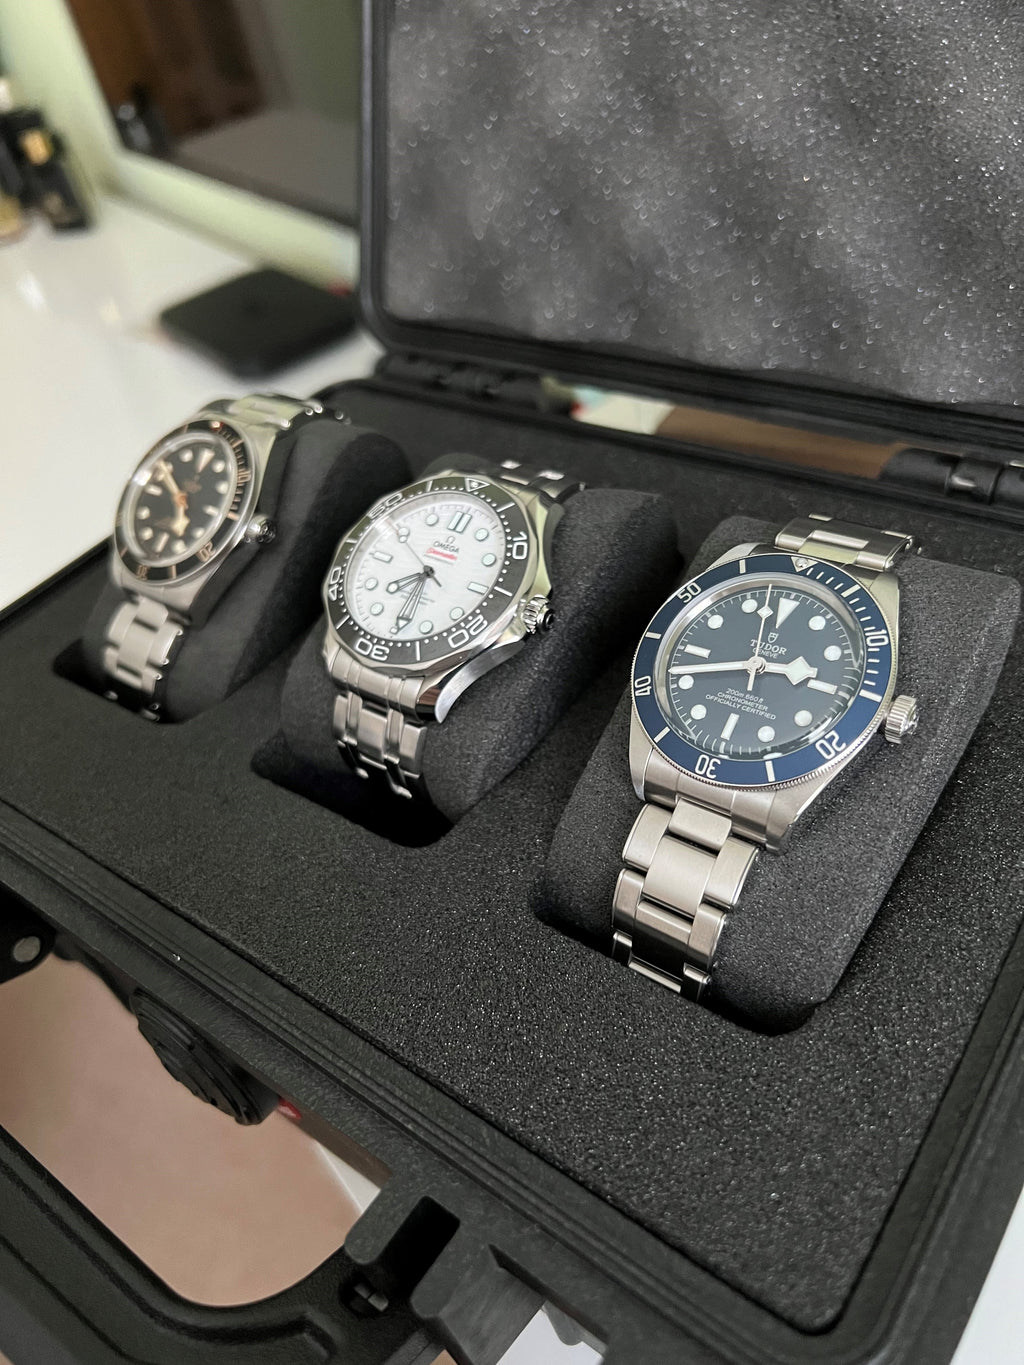 A Watch Collecting Guide: A Look Inside the Father & Son Watches’ Collection.